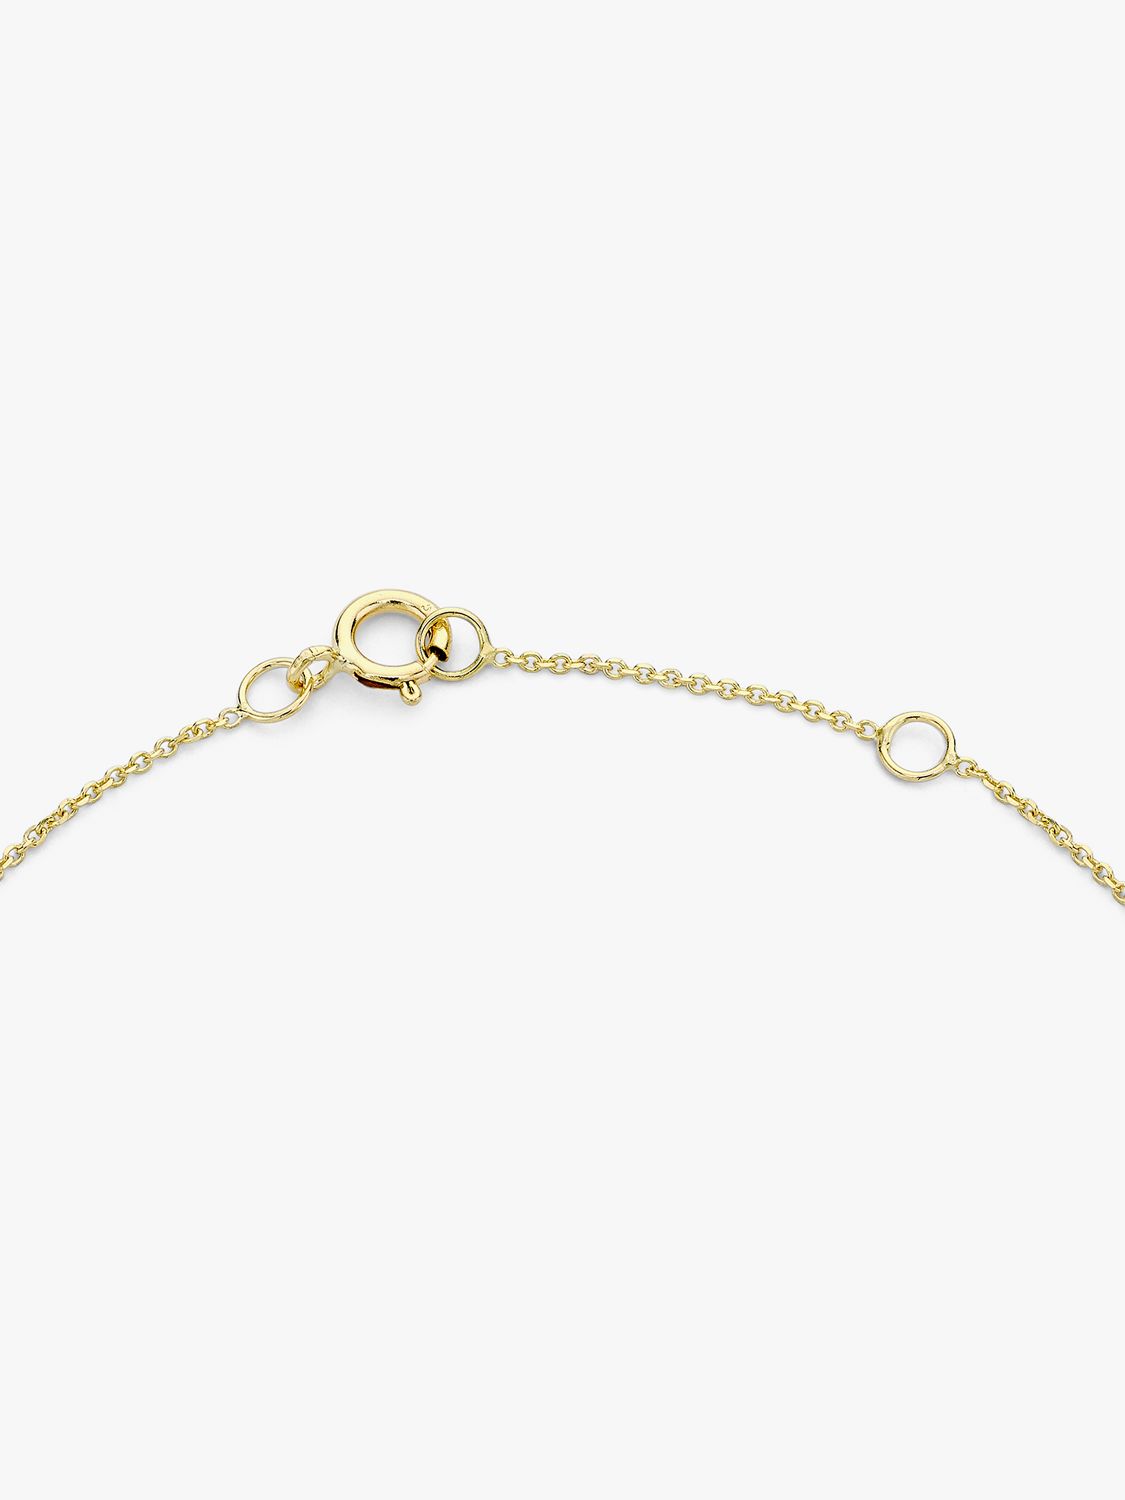 IBB 9ct Yellow Gold Initial Bracelet, A